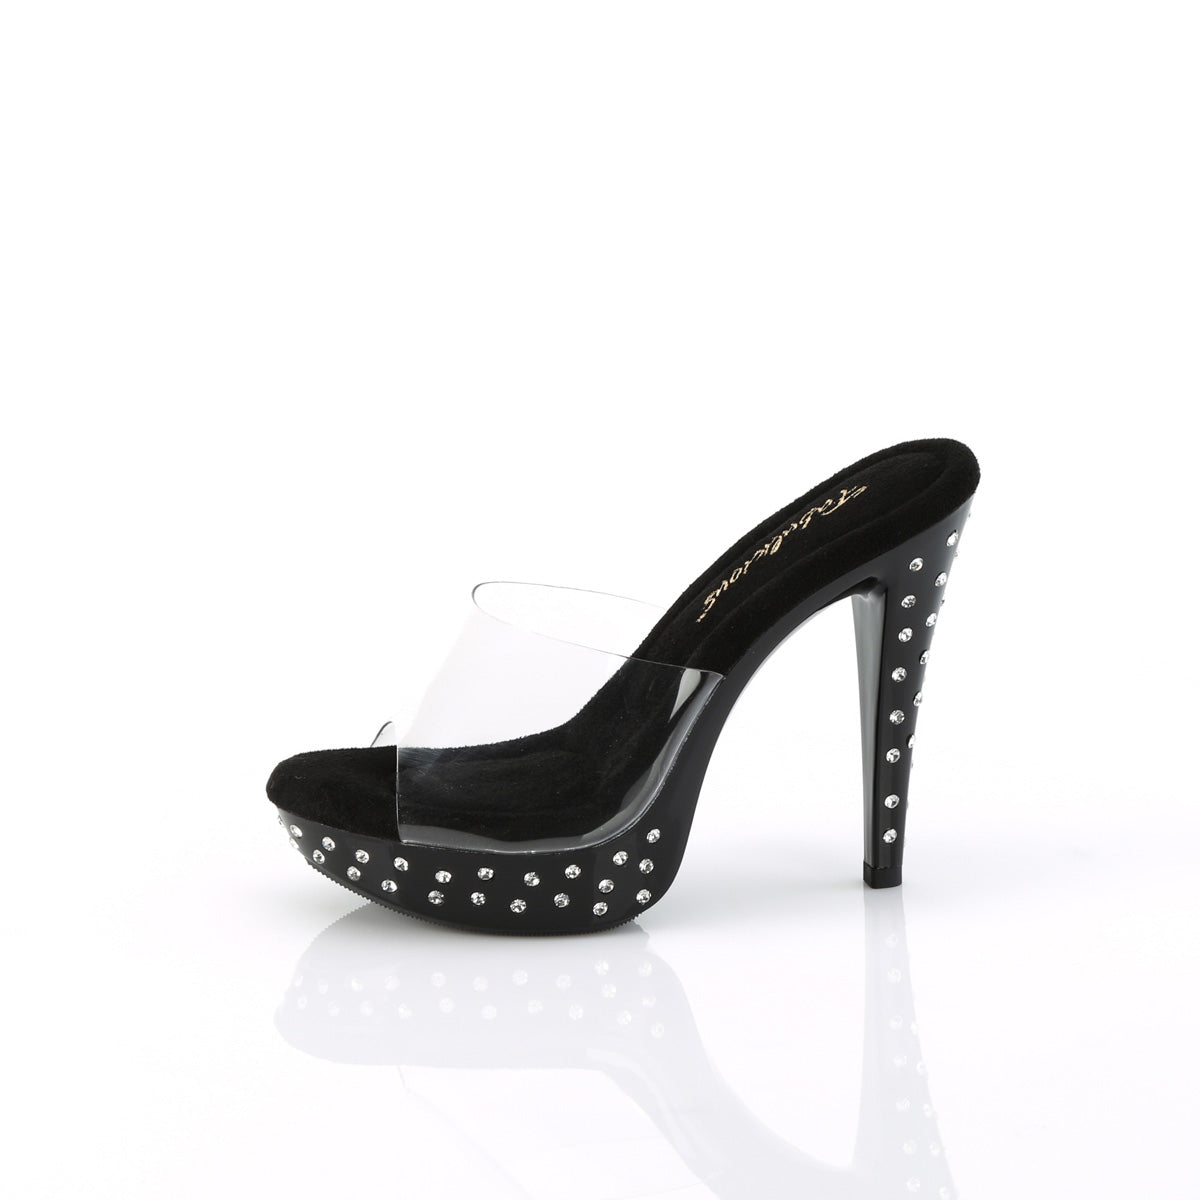 COCKTAIL-501SDT Fabulicious Clear/Black Shoes [Sexy Shoes]